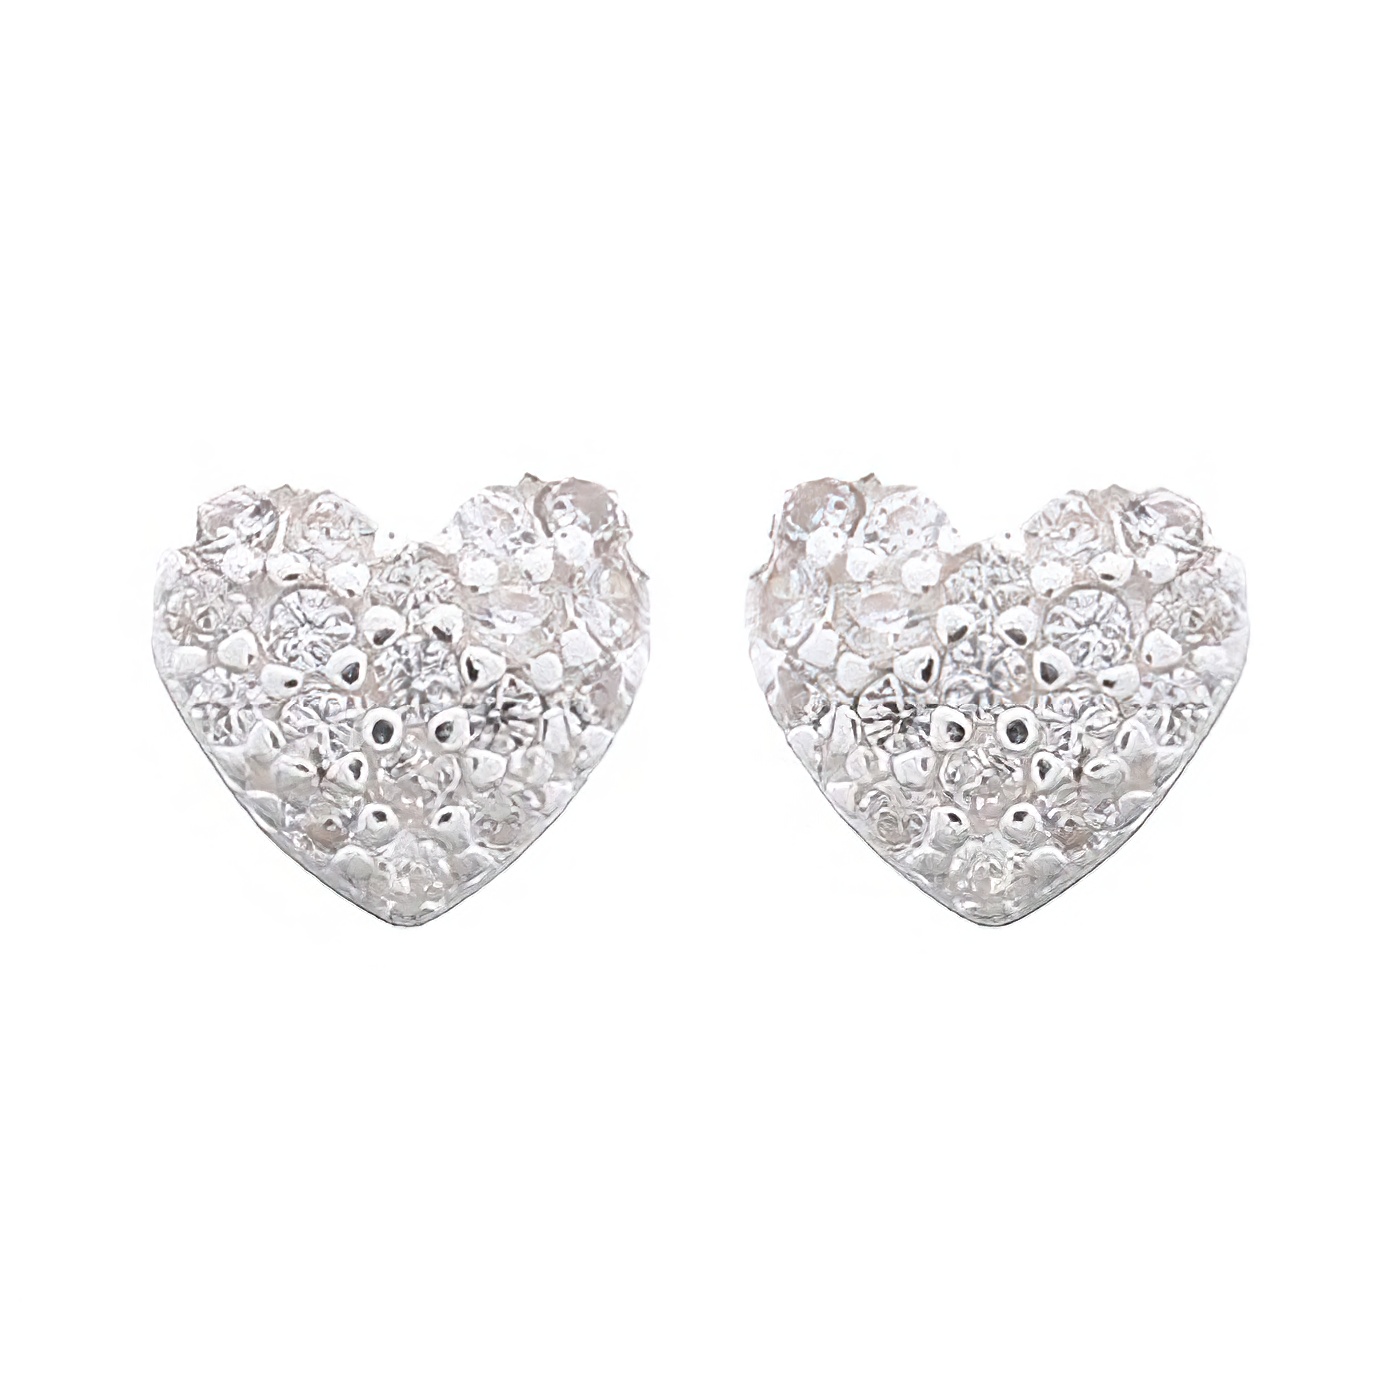 Little Heart Stud Earrings Silver with Cubic Zirconia White by BeYindi 